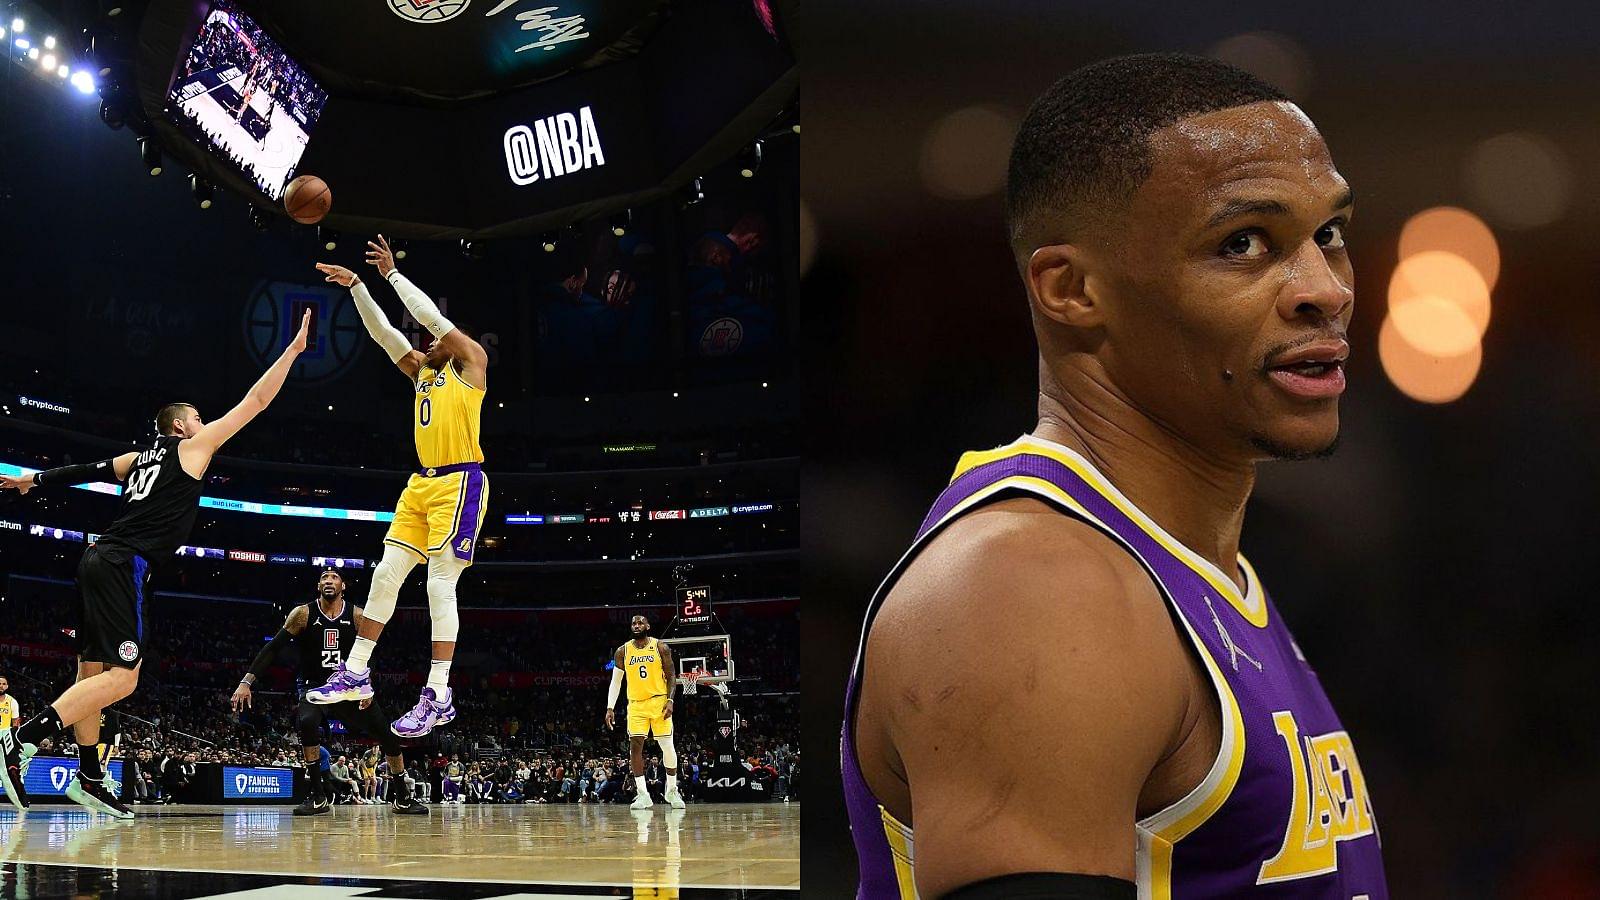 WATCH: Russell Westbrook who shot under 30% from three in 2021-22 is working on a new jumpshot